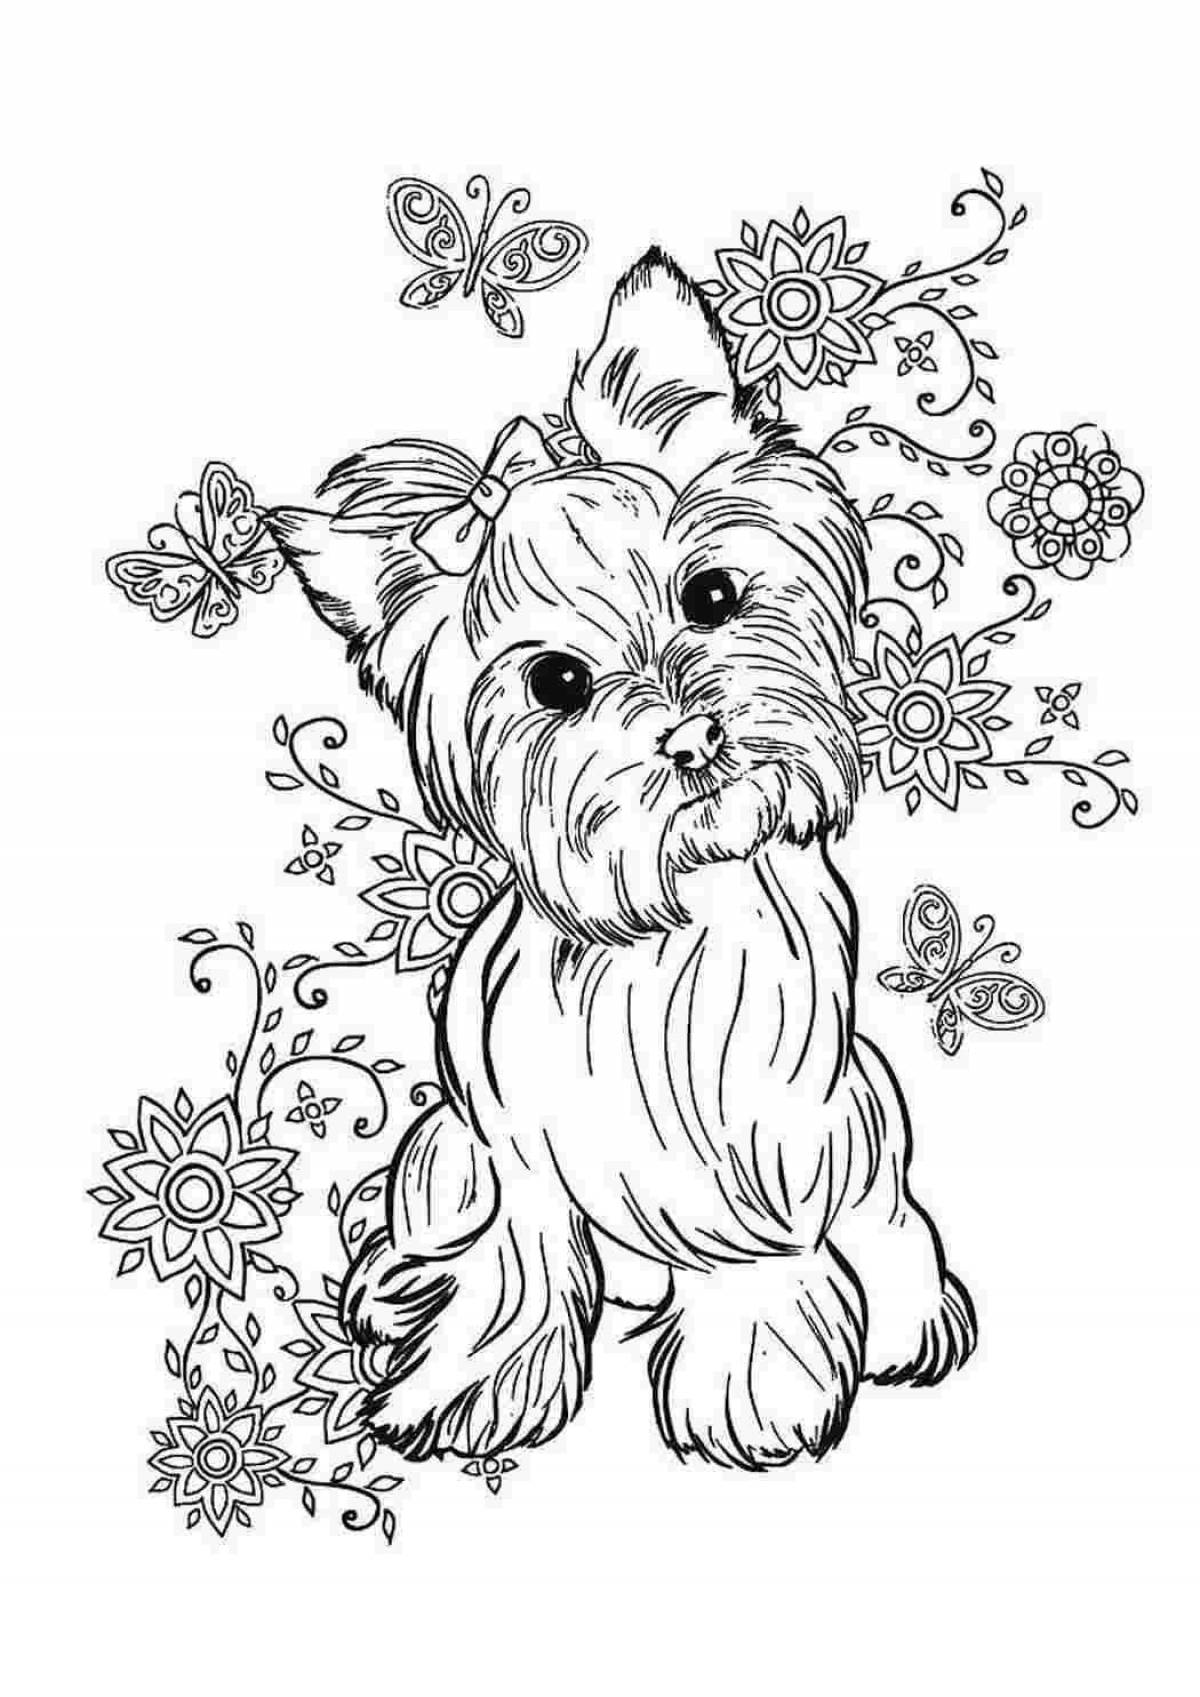 Amazing coloring pages for girls 10 years old - very beautiful animals